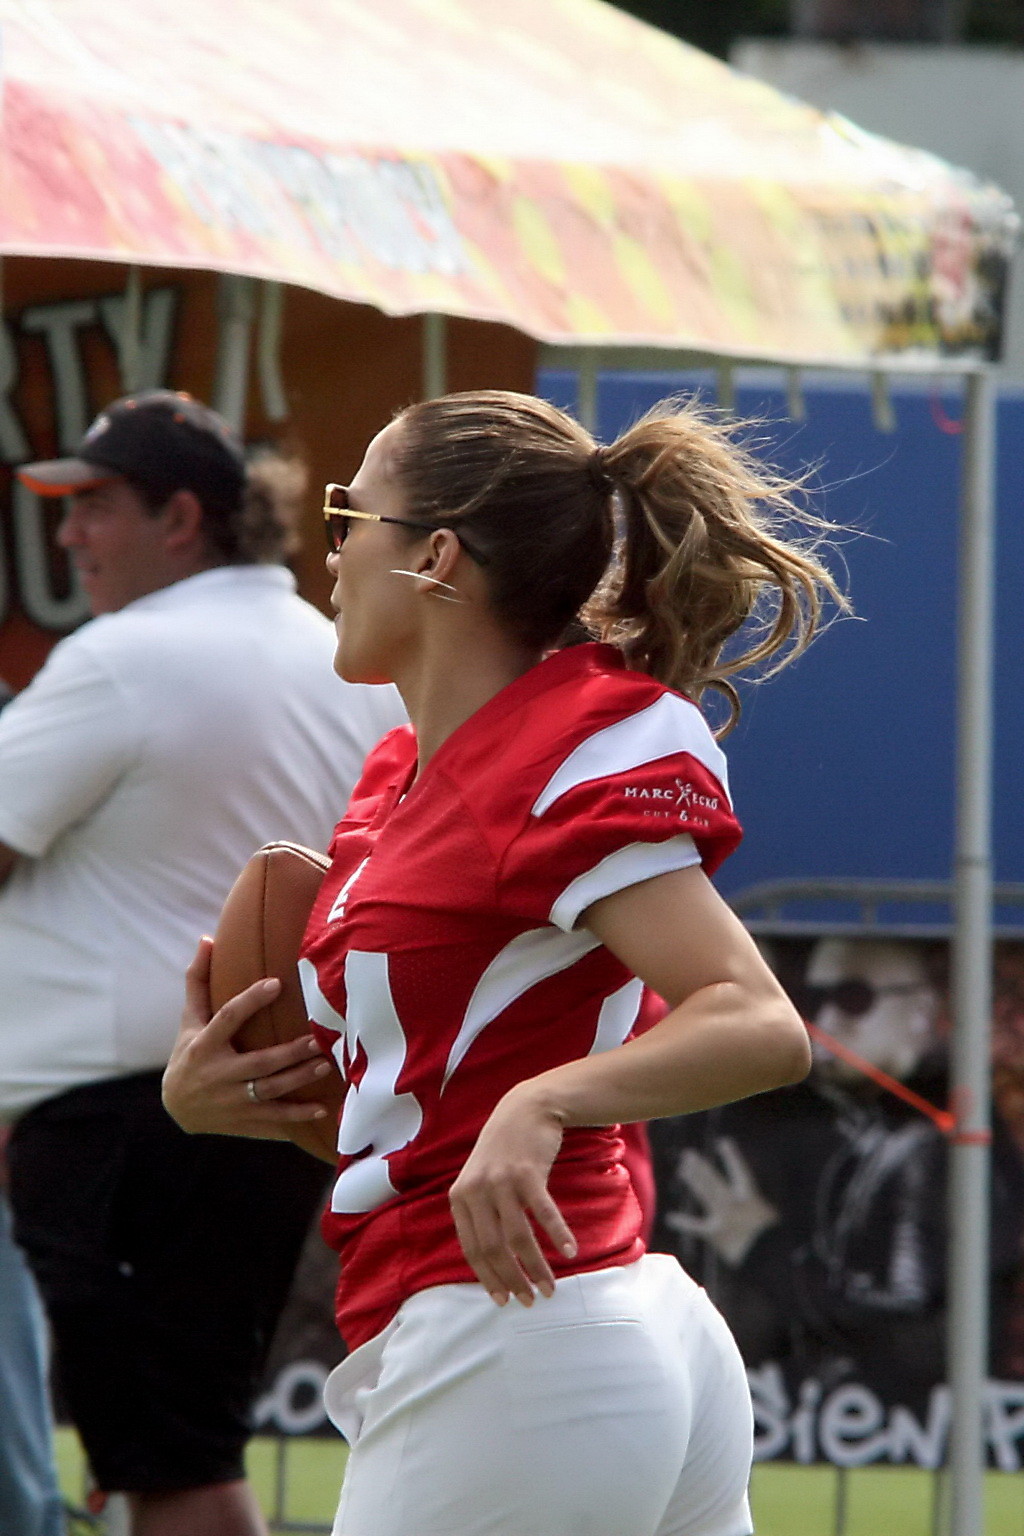 Jennifer Lopez stunning in a hot jersey at the charity football game in Puerto R #75245171